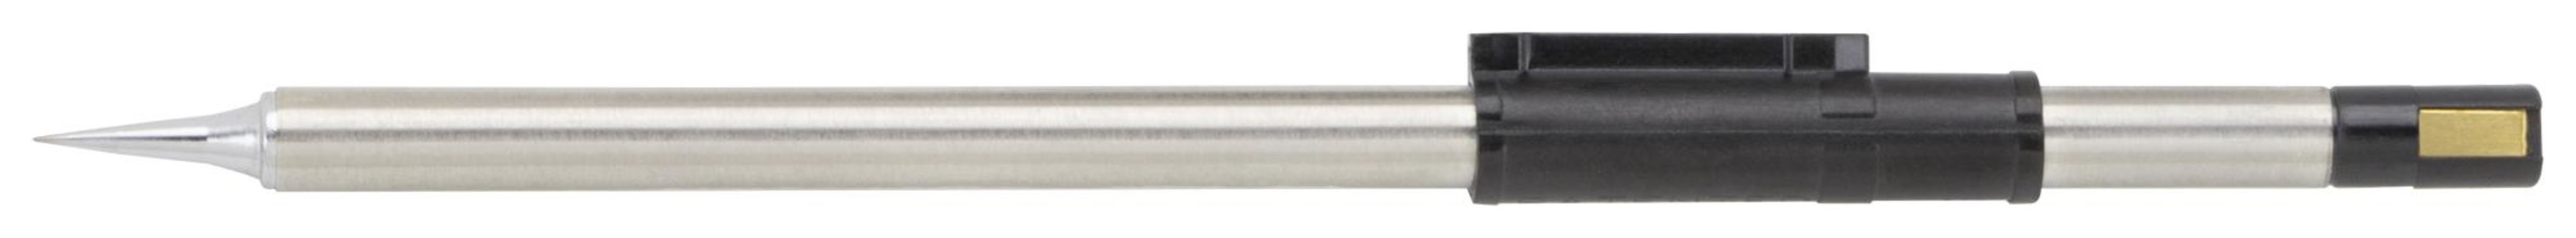 Pace 1124-0036-P1 Tip Cartridge, Conical, 1/128